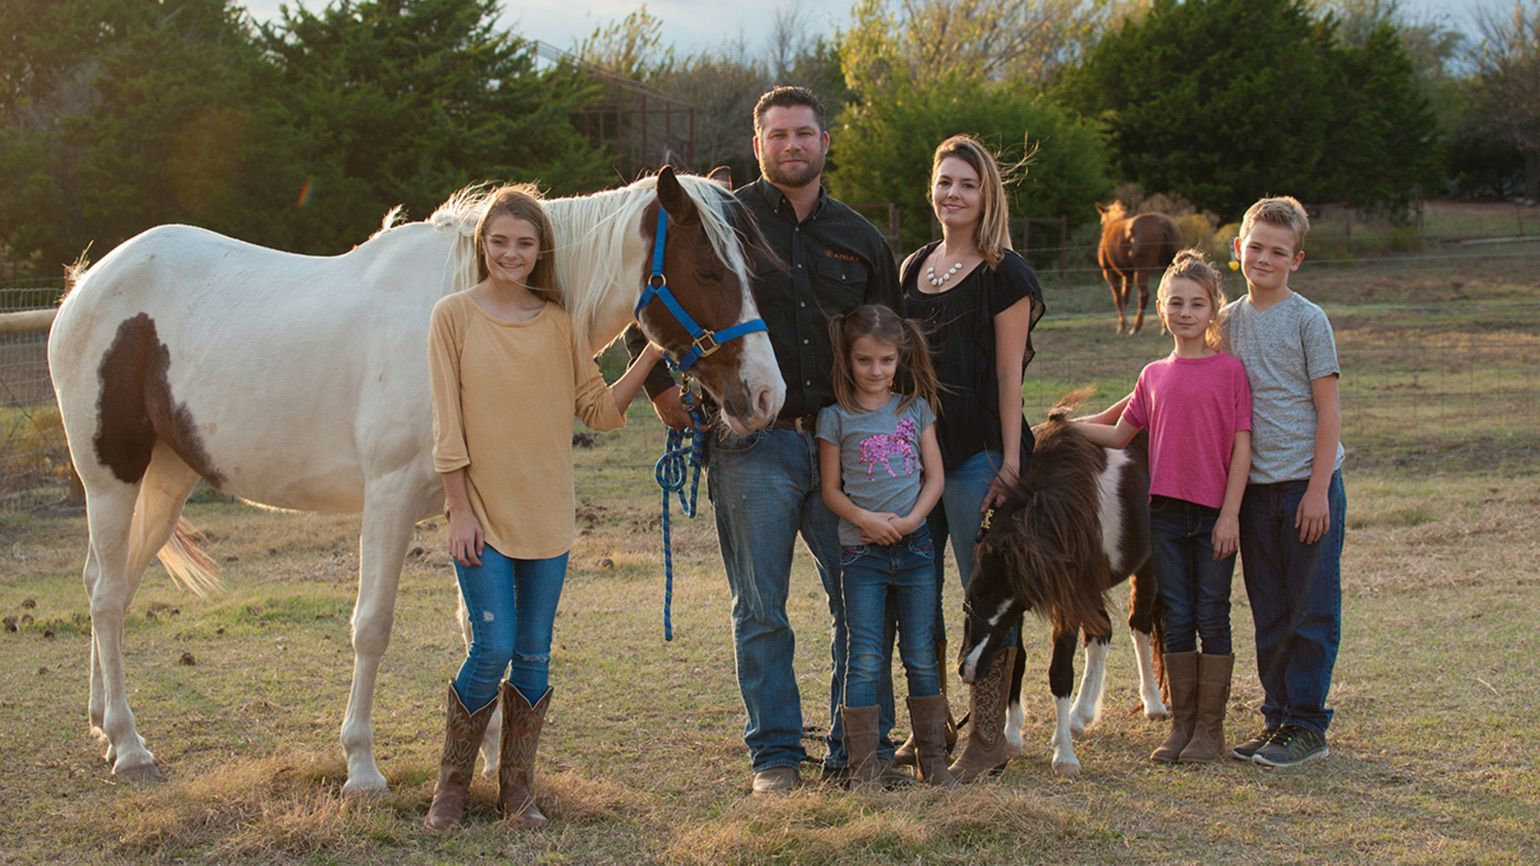 How the Hance Family Turned Their Home into an Animal Sanctuary ...